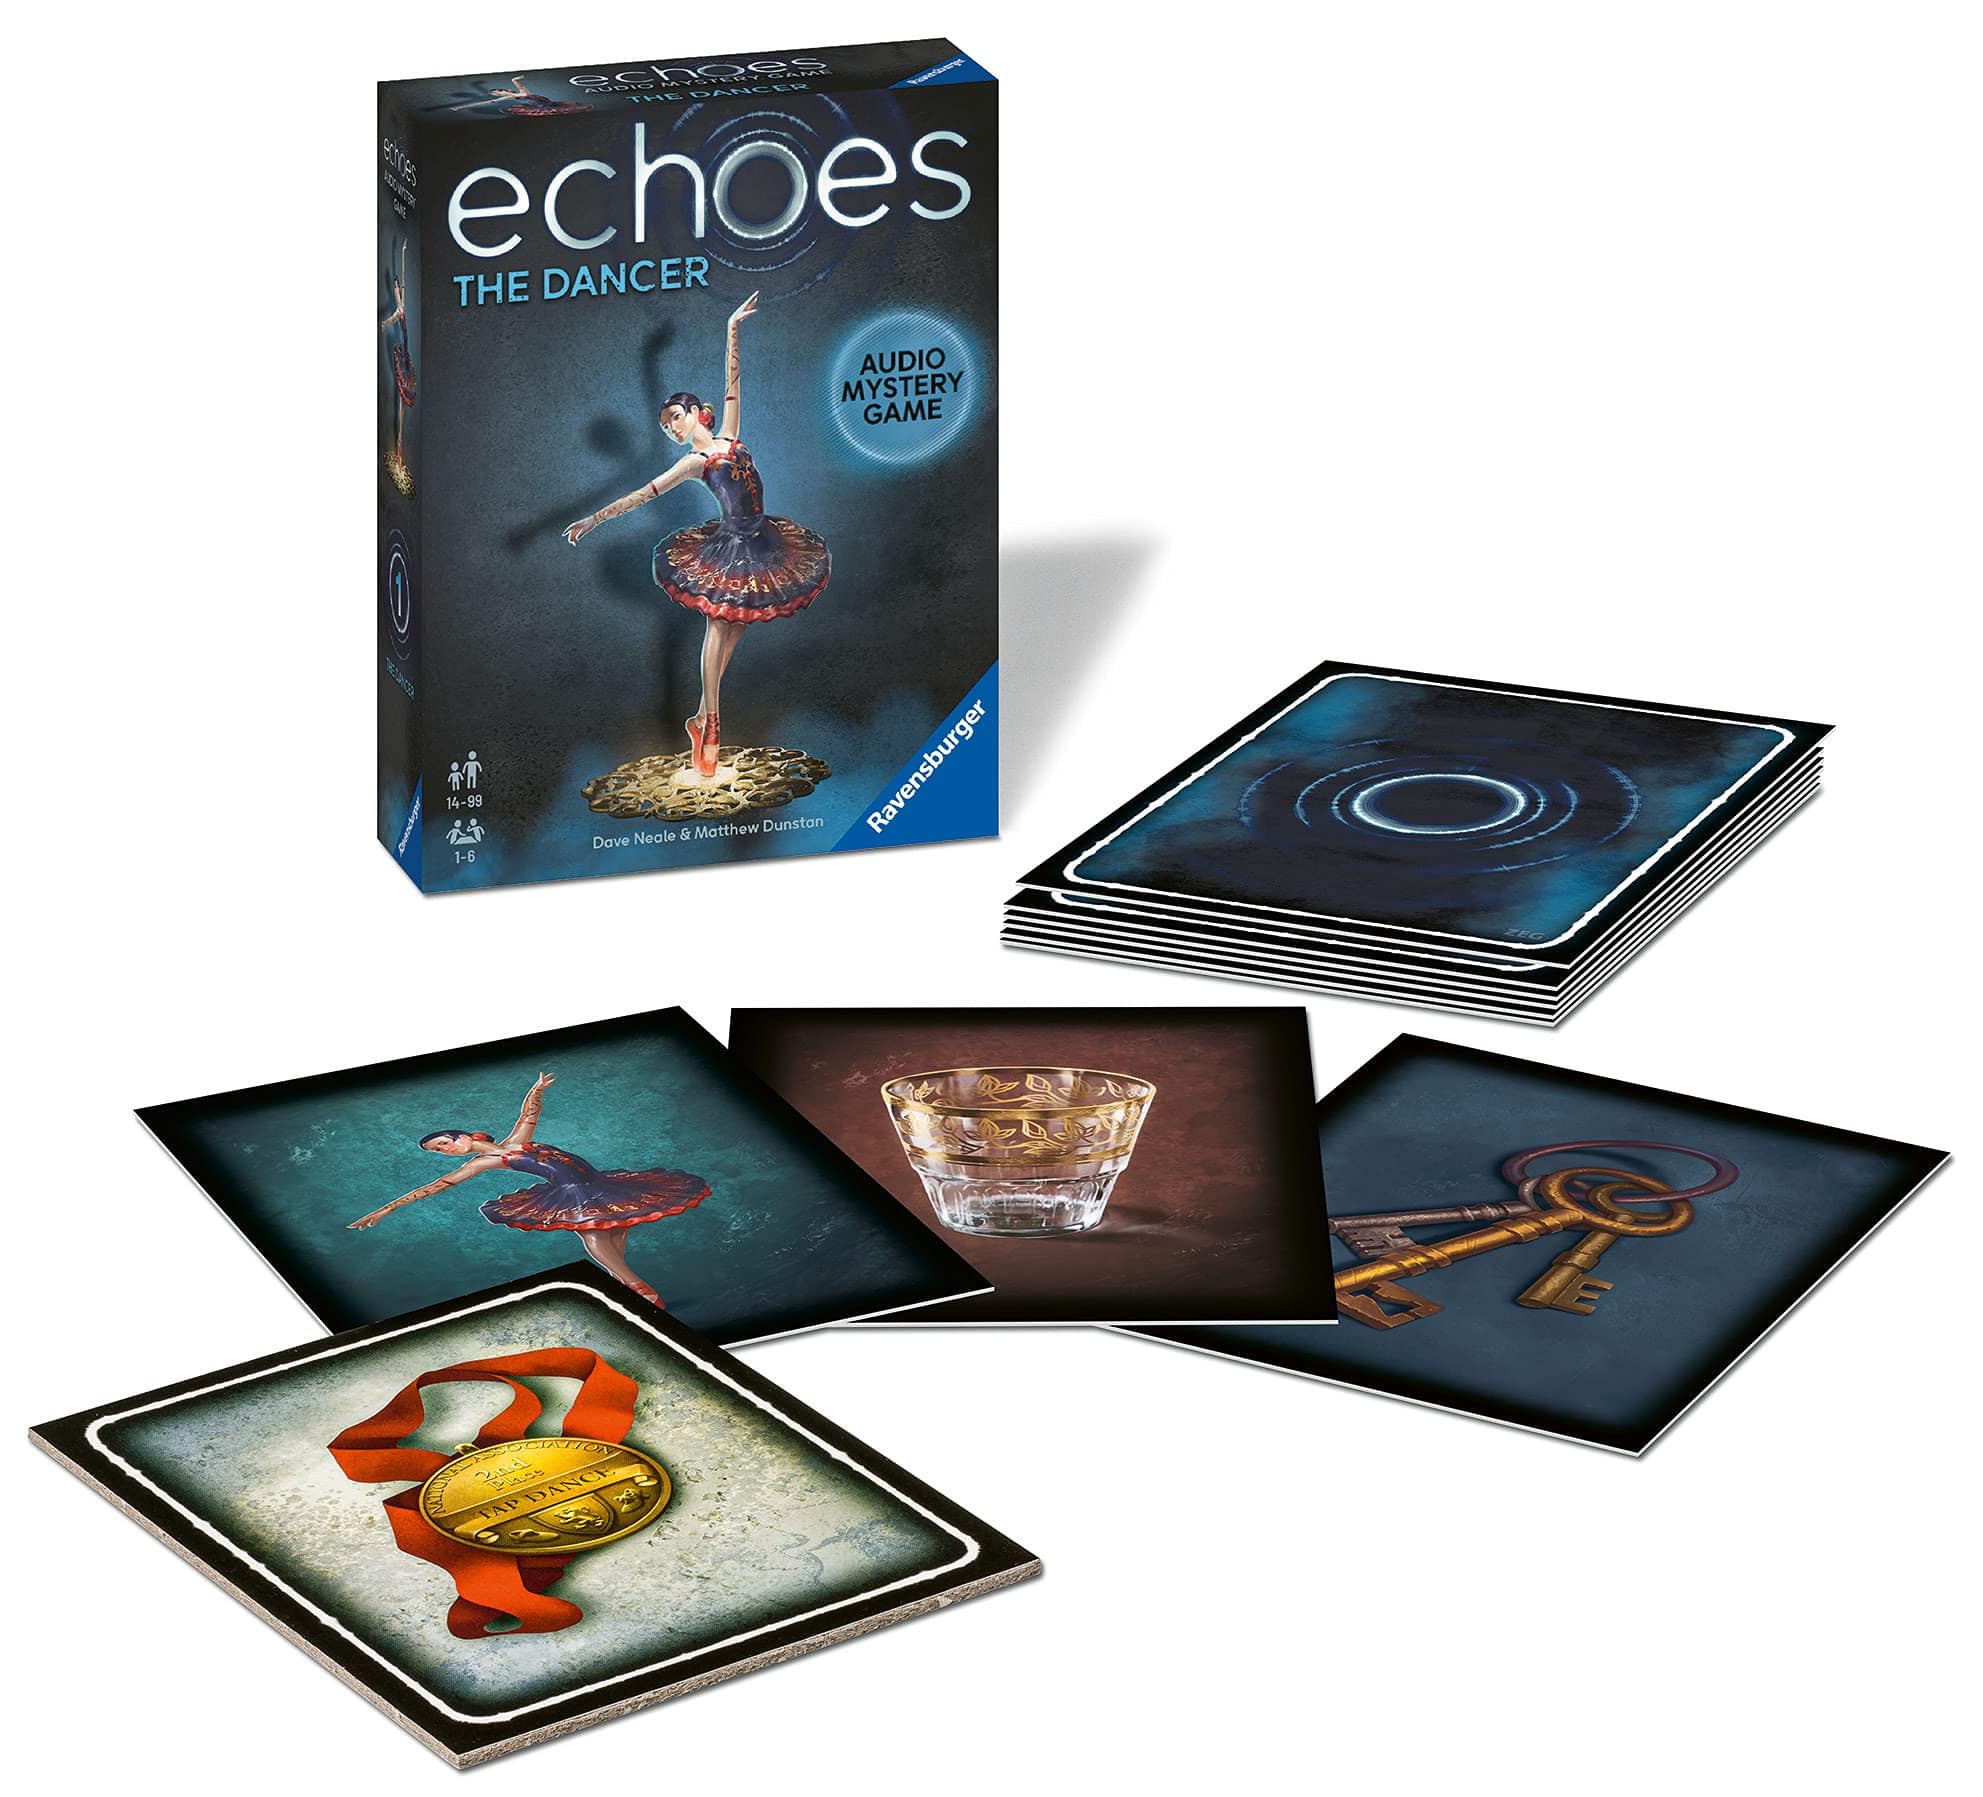 Ravensburger echoes: The Dancer - Lost City Toys